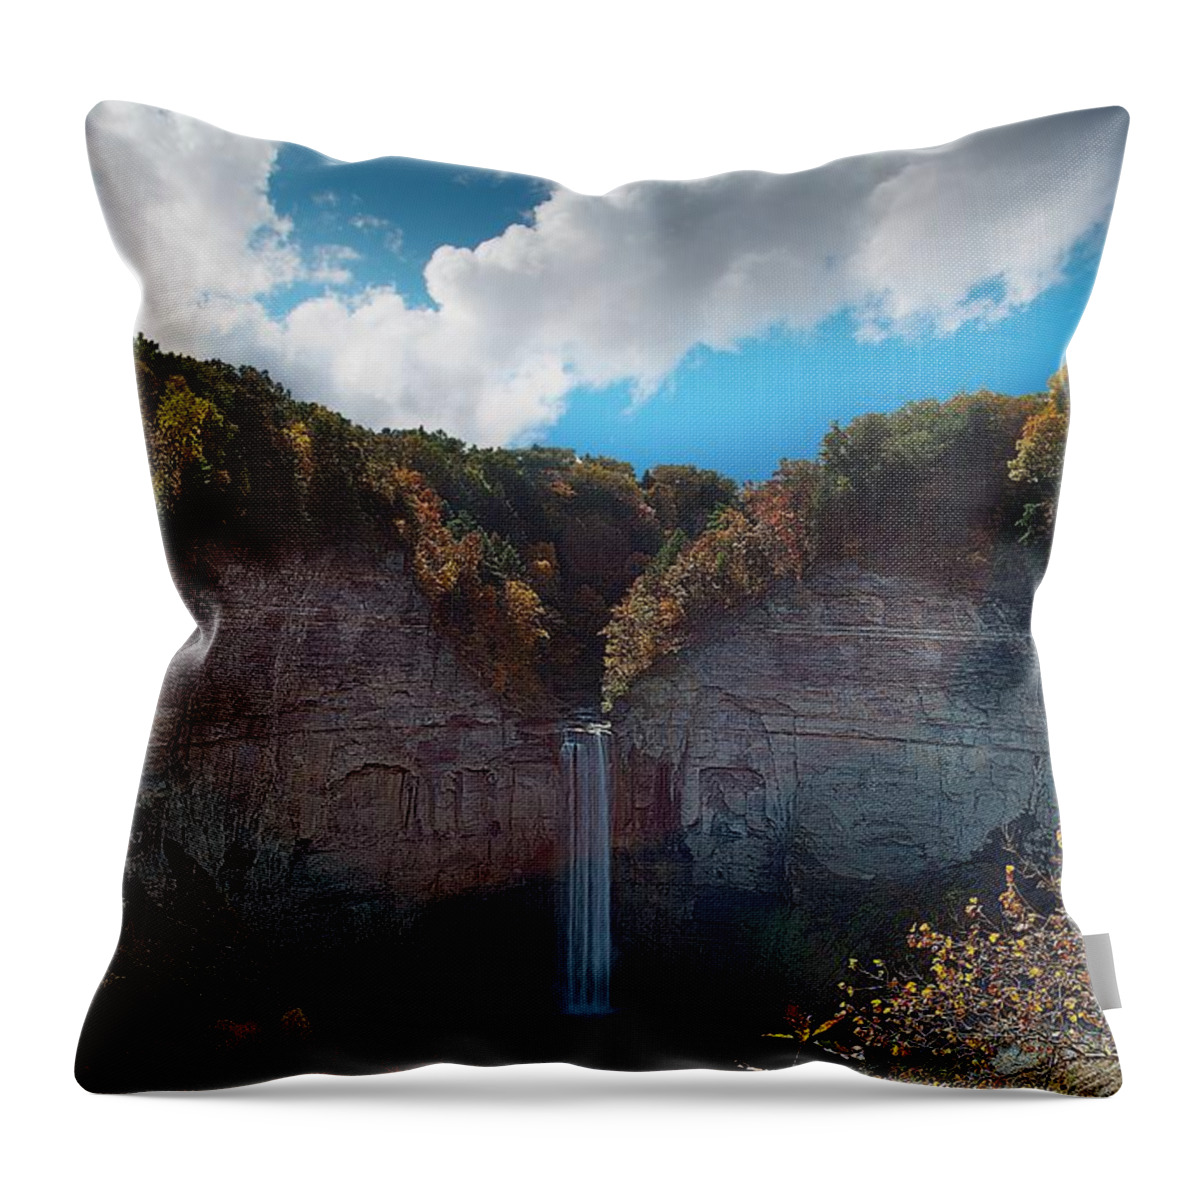 Taughannock Throw Pillow featuring the photograph Taughannock Falls Ithaca New York #1 by Paul Ge